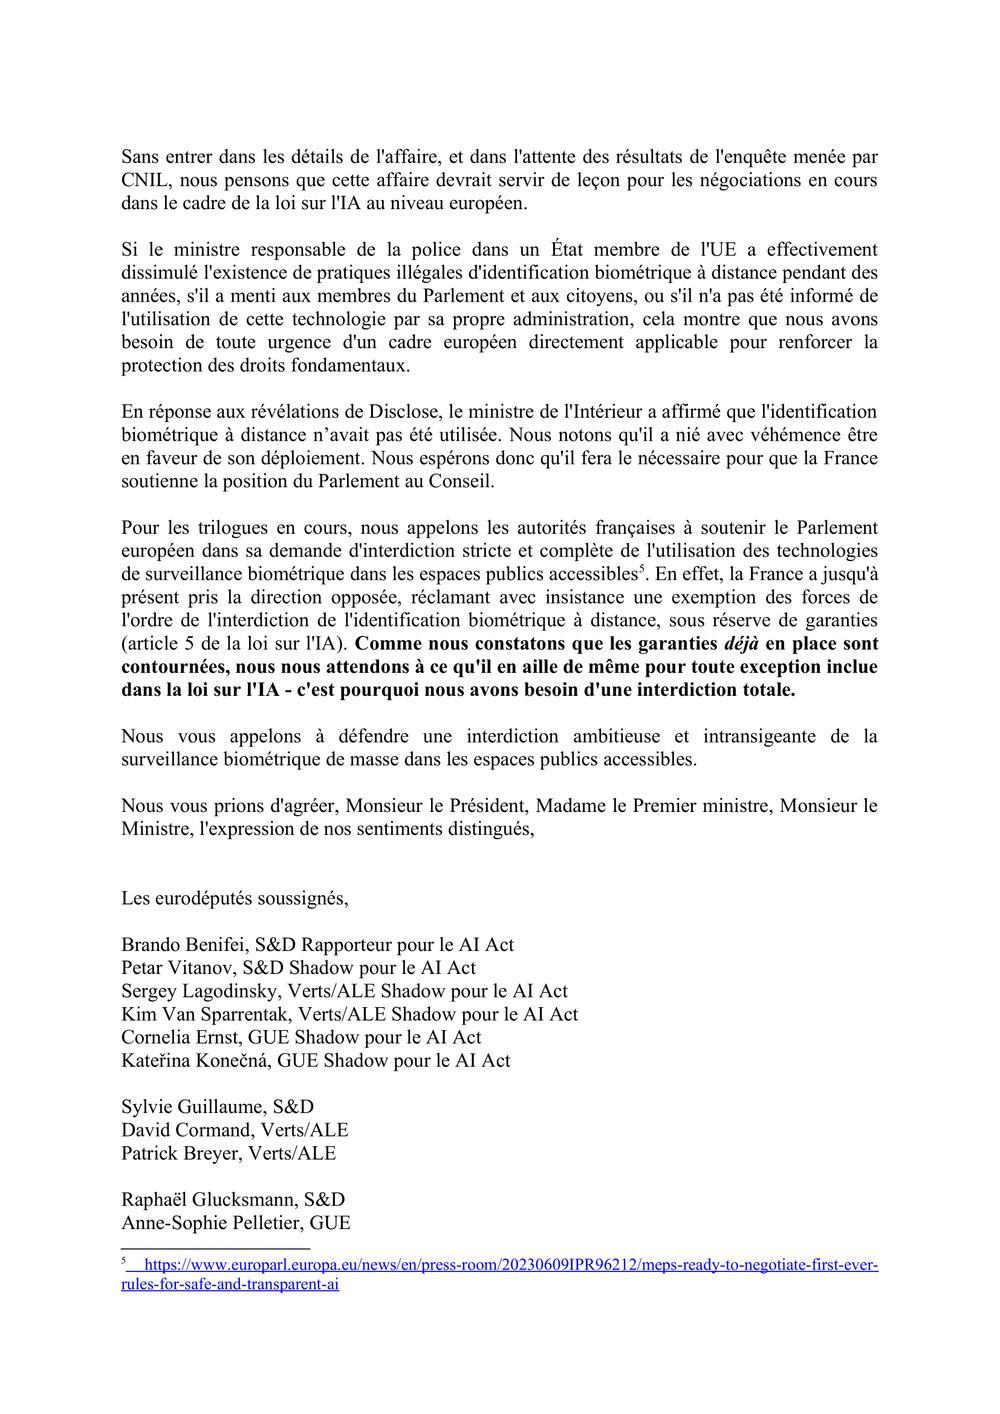 mep-open-letter-regarding-the-revelations-of-illegal-use-of-facial-recognition-in-france-1-2.png